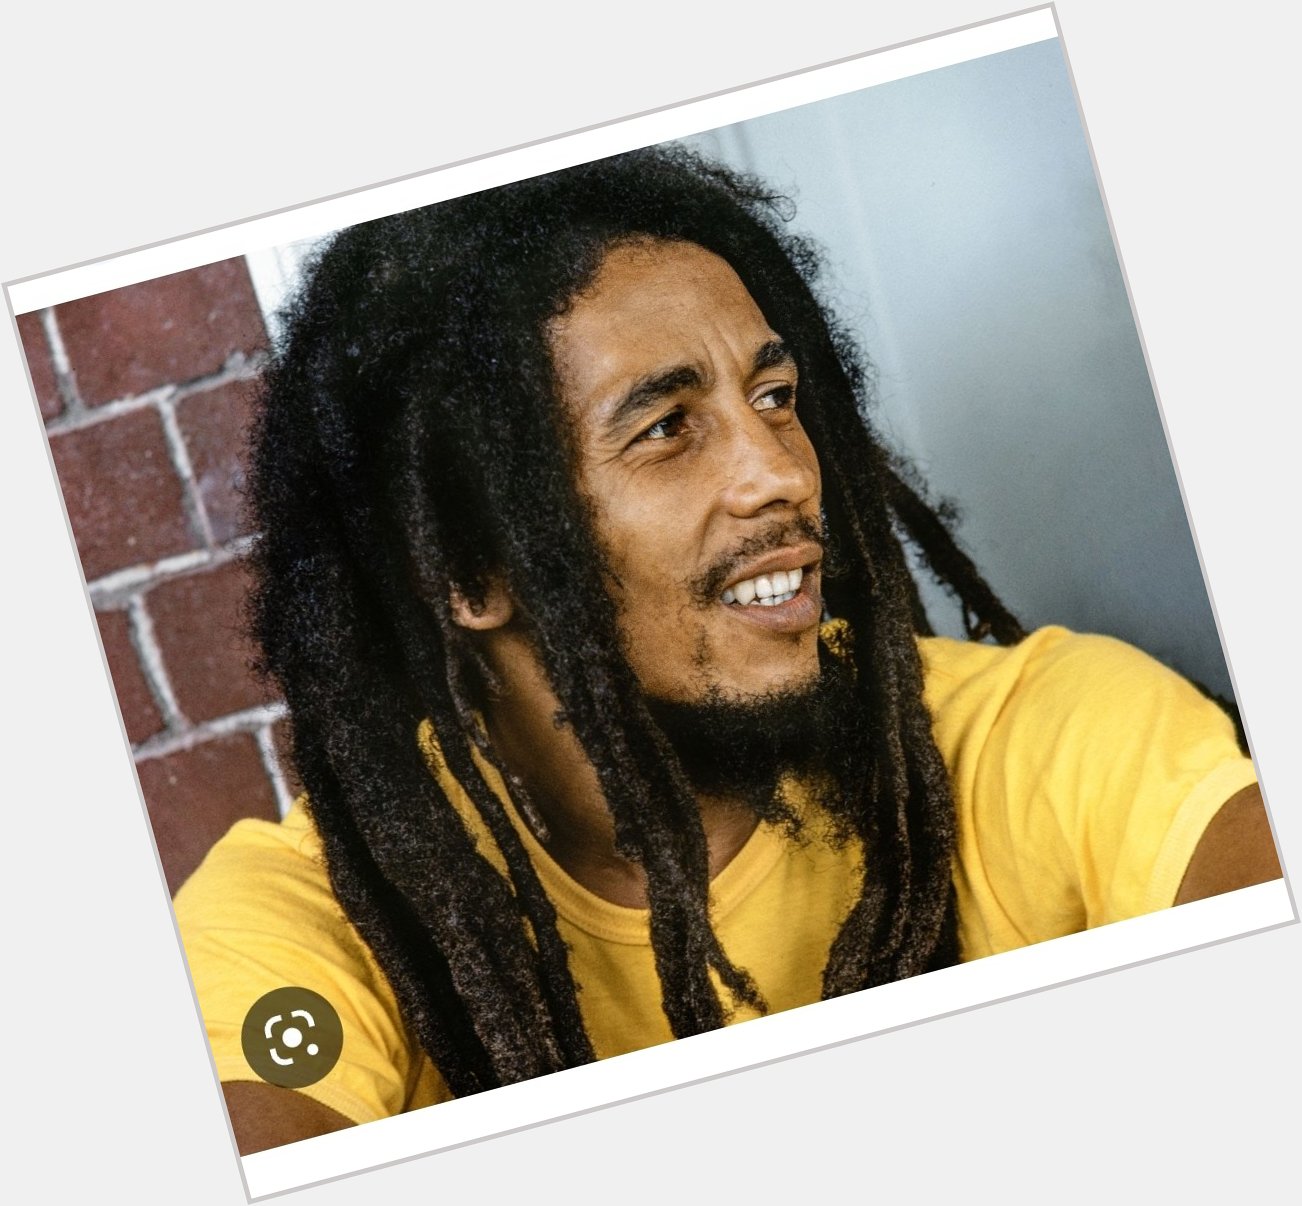 Happy Birthday Bob Marley\s 
Continue to Rest in Peace!!! 